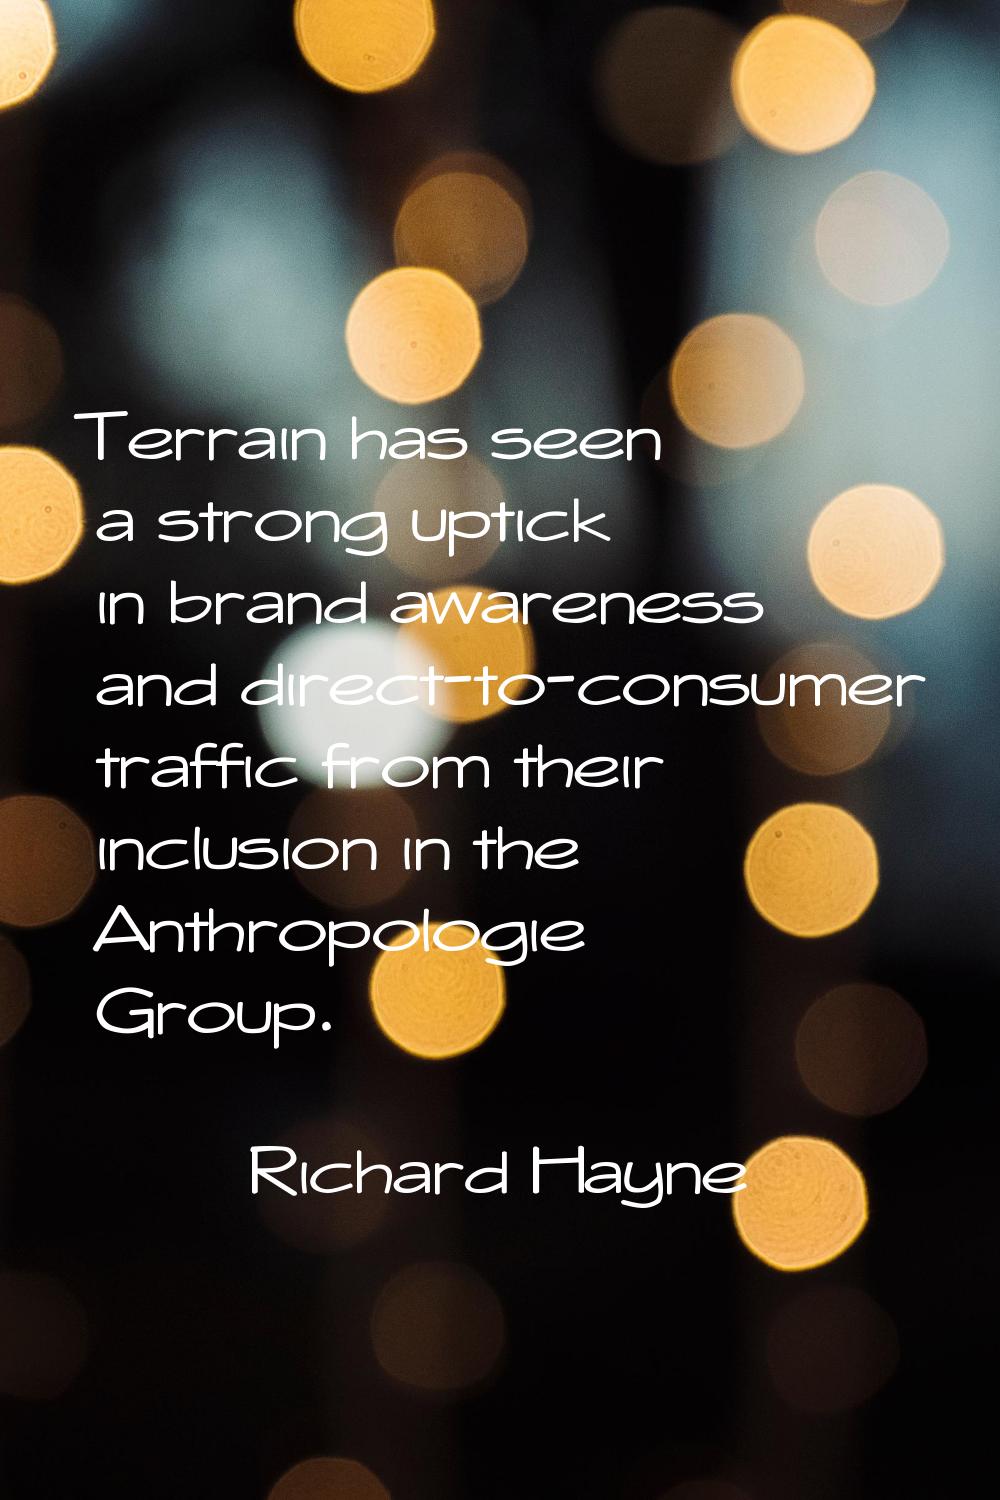 Terrain has seen a strong uptick in brand awareness and direct-to-consumer traffic from their inclu